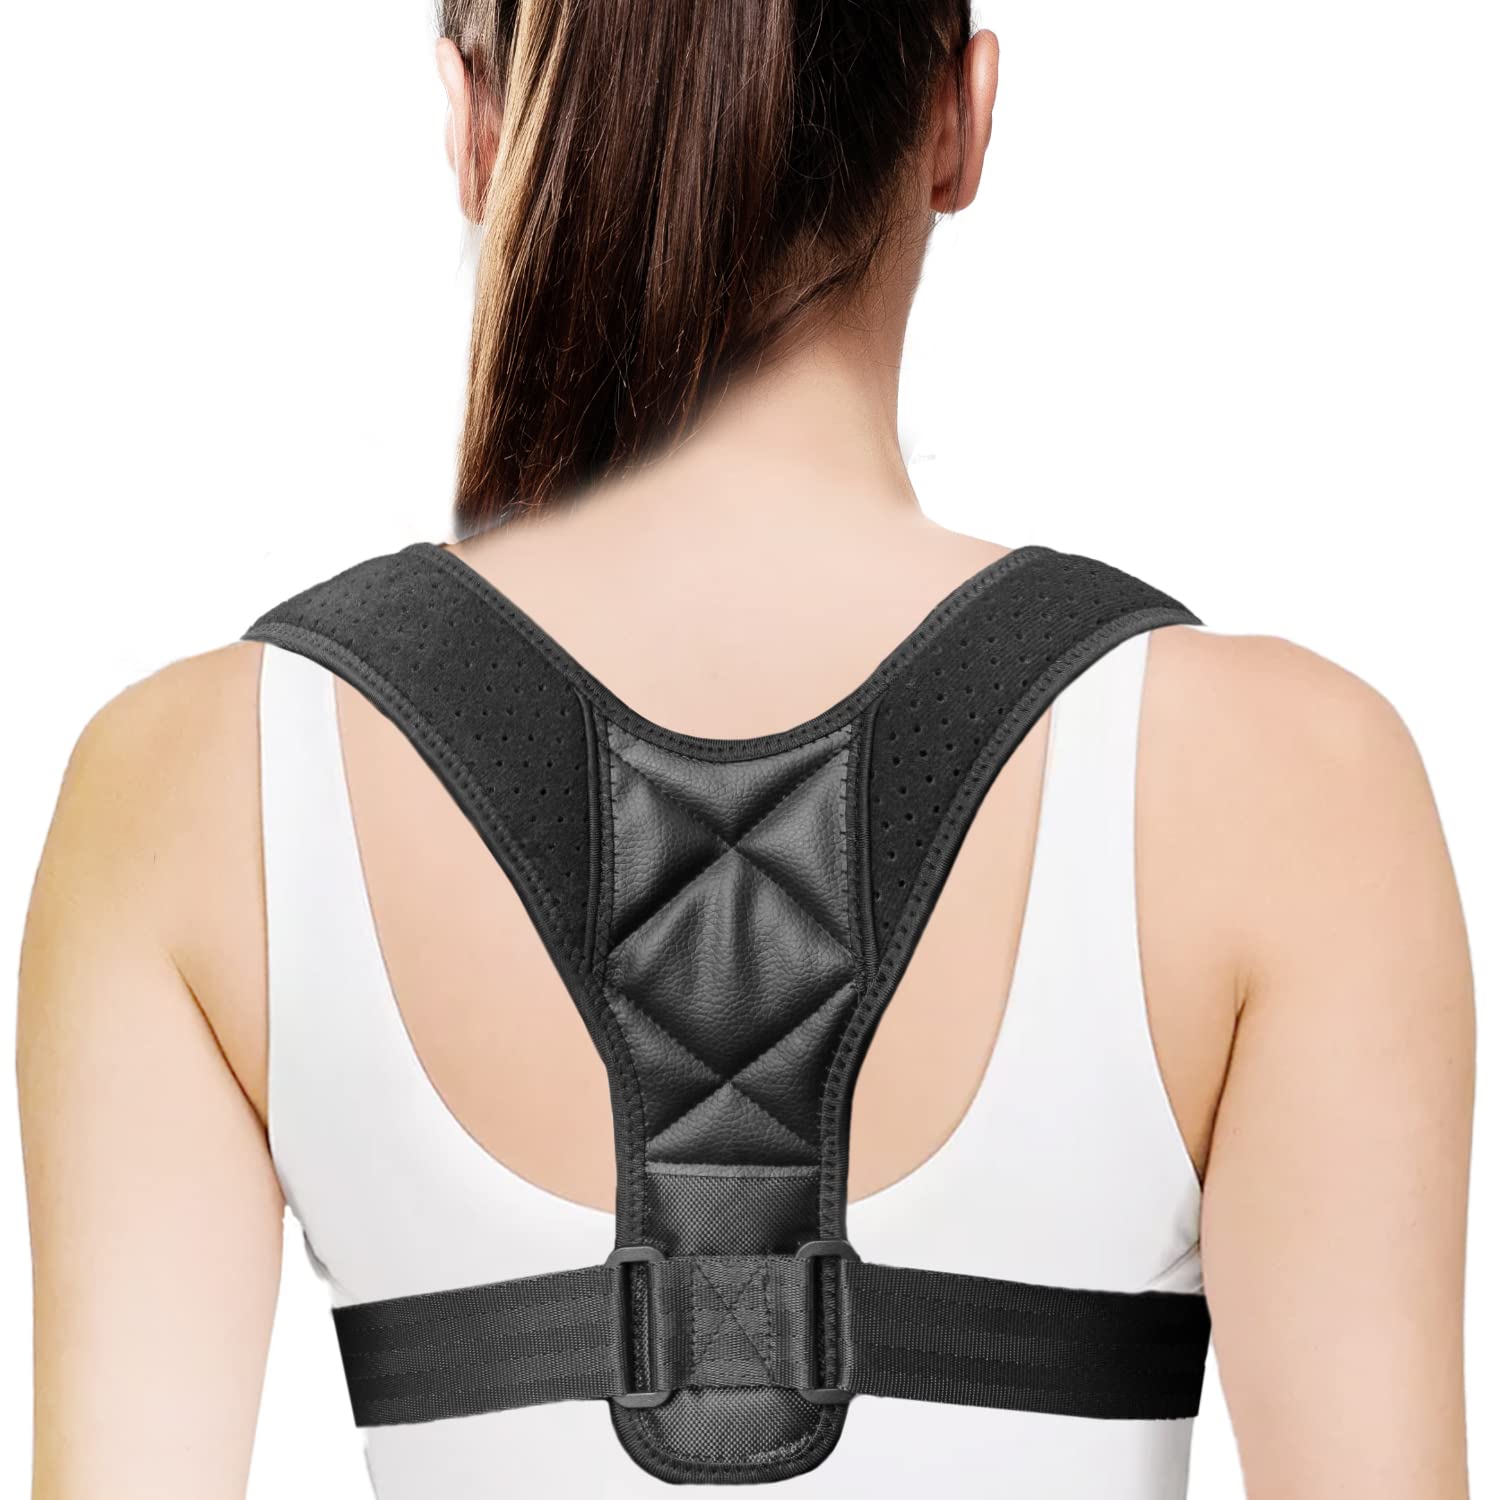 Vicorrect Posture Corrector for Women and Men, Adjustable Upper Back Brace  for Clavicle Support and Providing Pain Relief from Neck, Shoulder, and